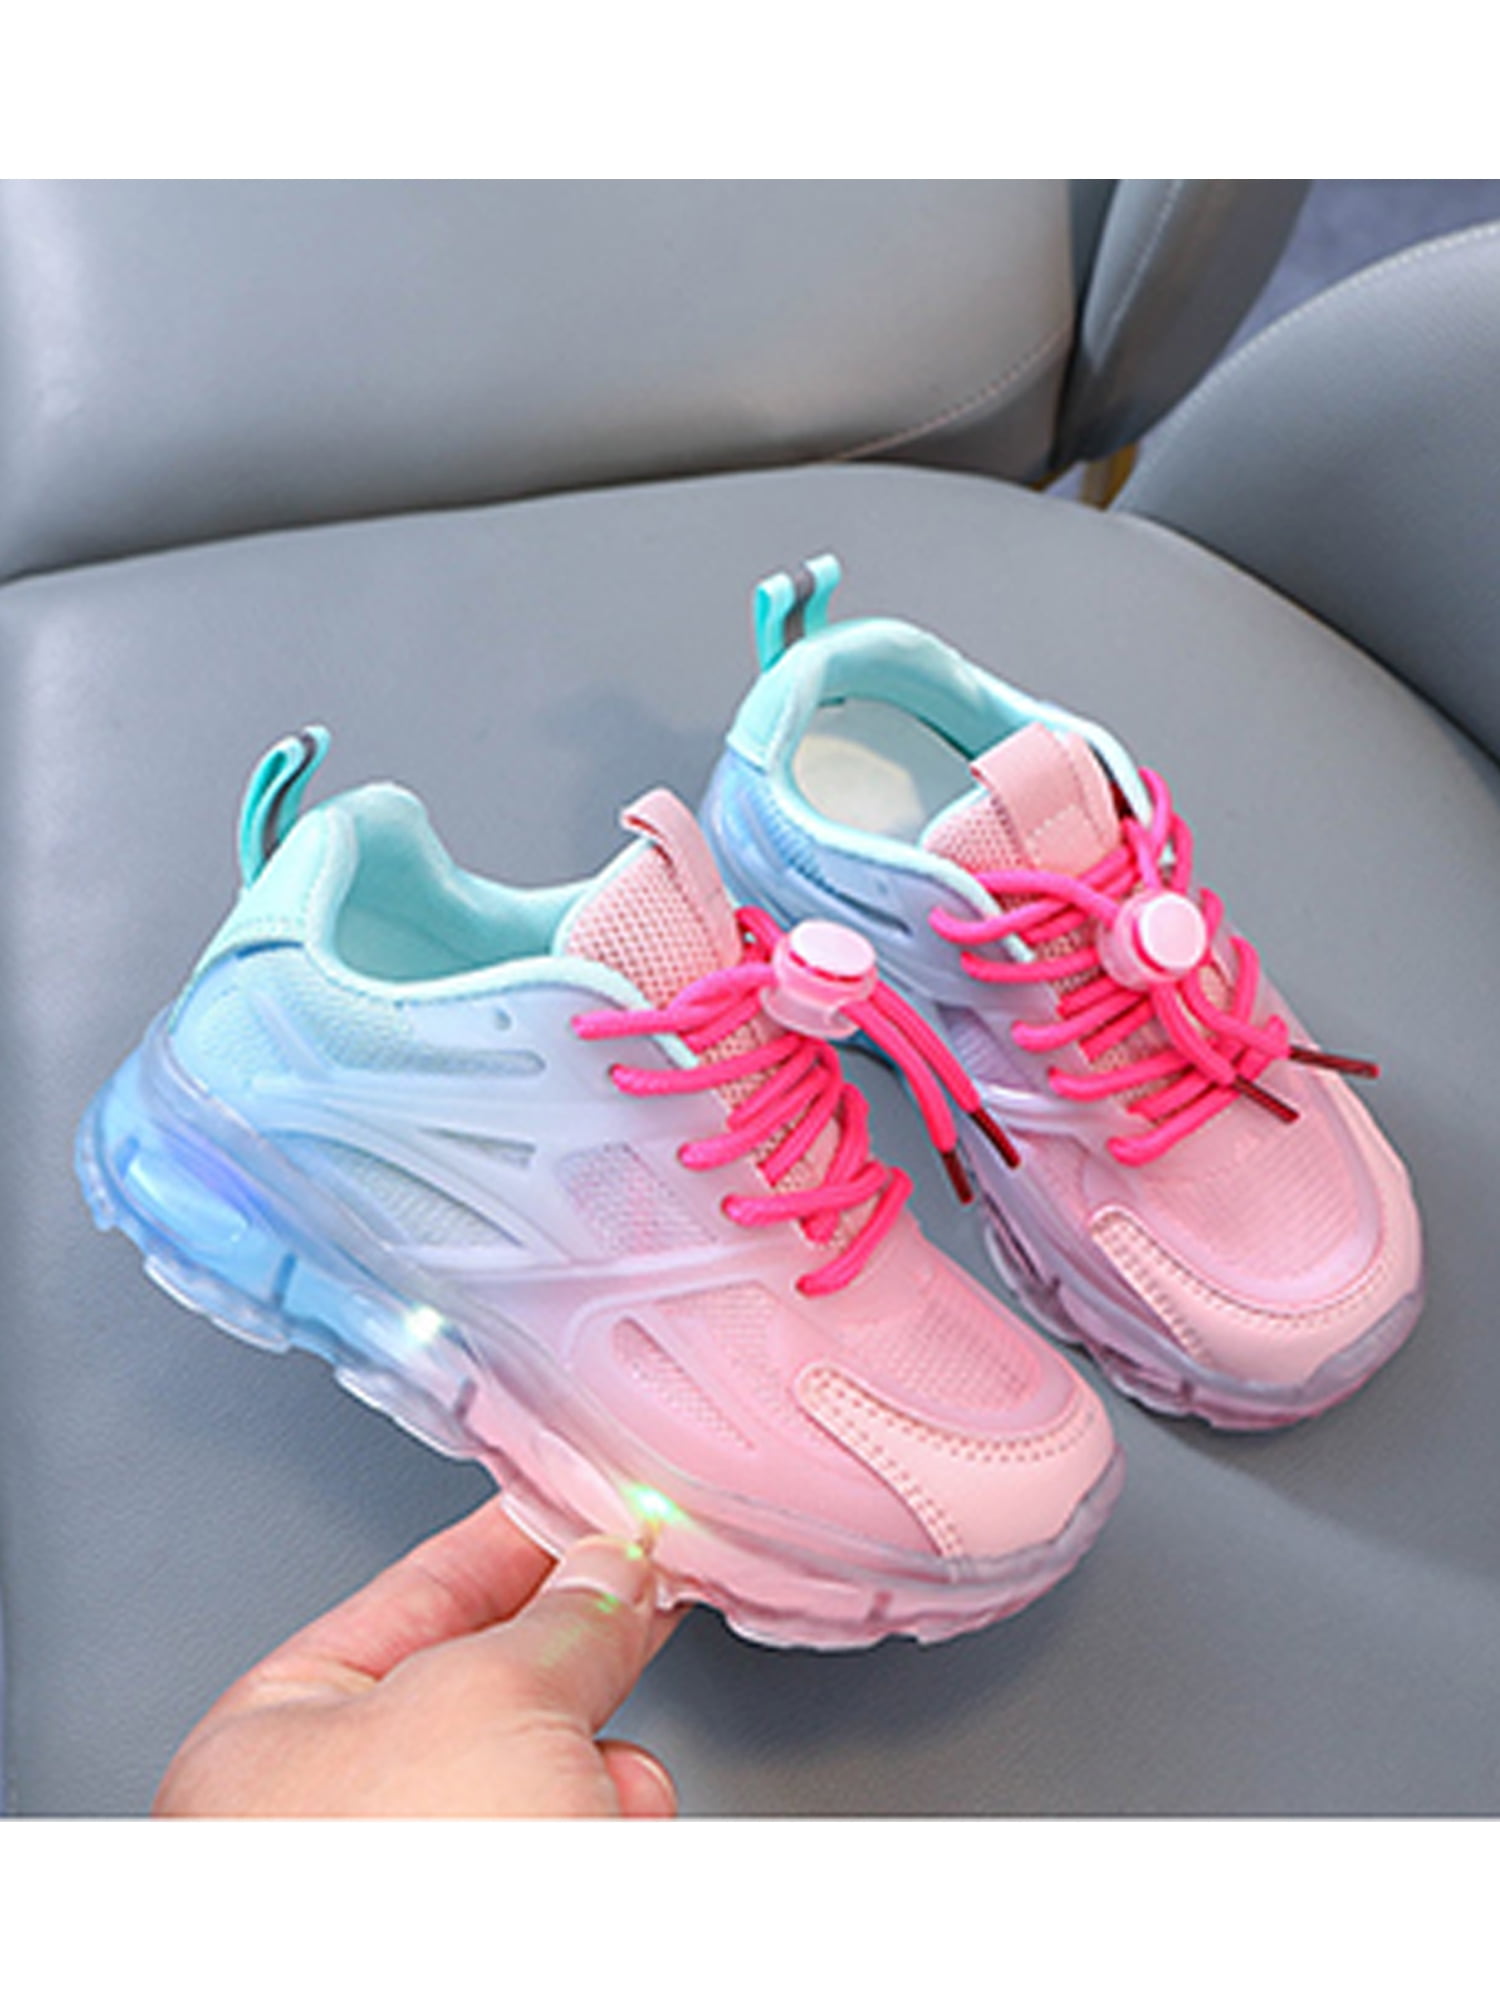 SIMANLAN Kids Sneakers Comfort Athletic Shoes Sport Running Shoe Boys Girls  Fashion Trainers Children Breathable Pink 13C